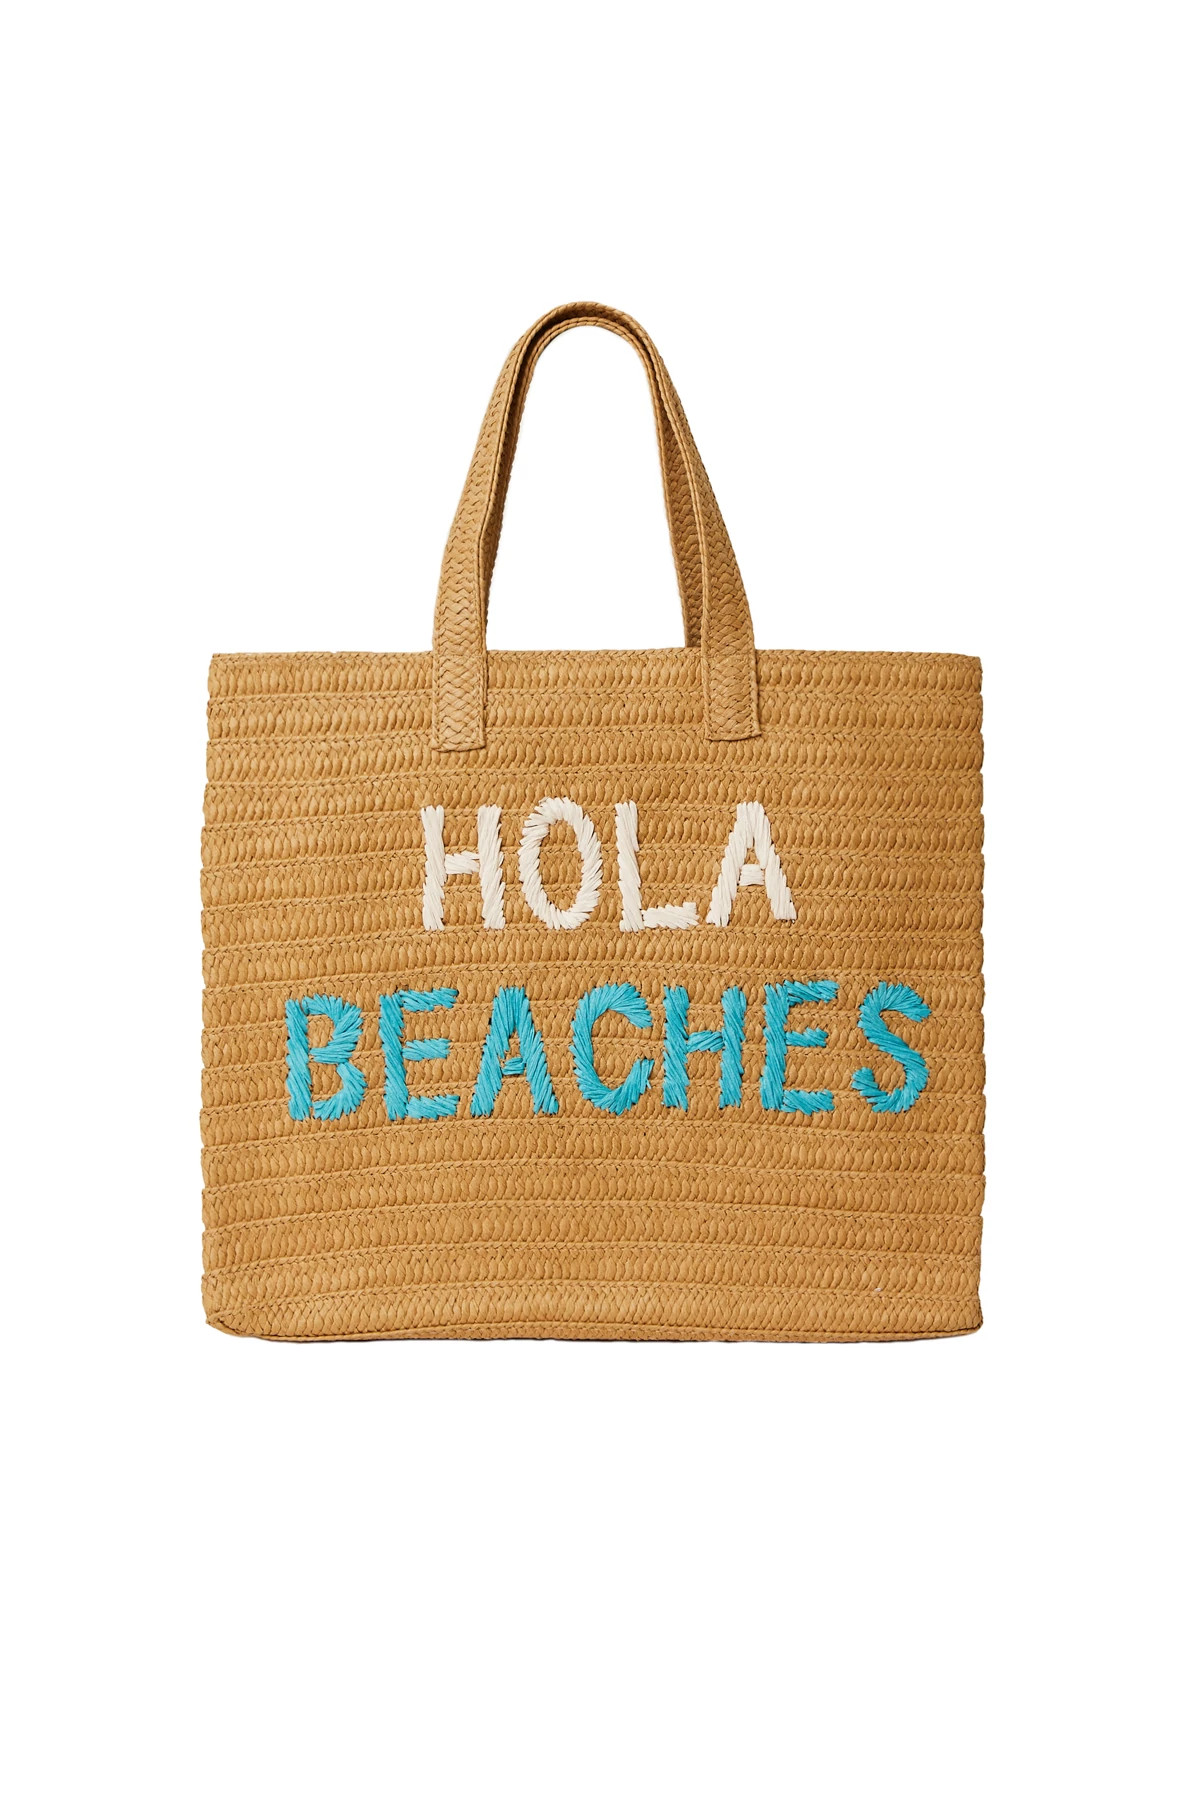 SAND CREAM TURQUOISE Hola Beaches Tote image number 1